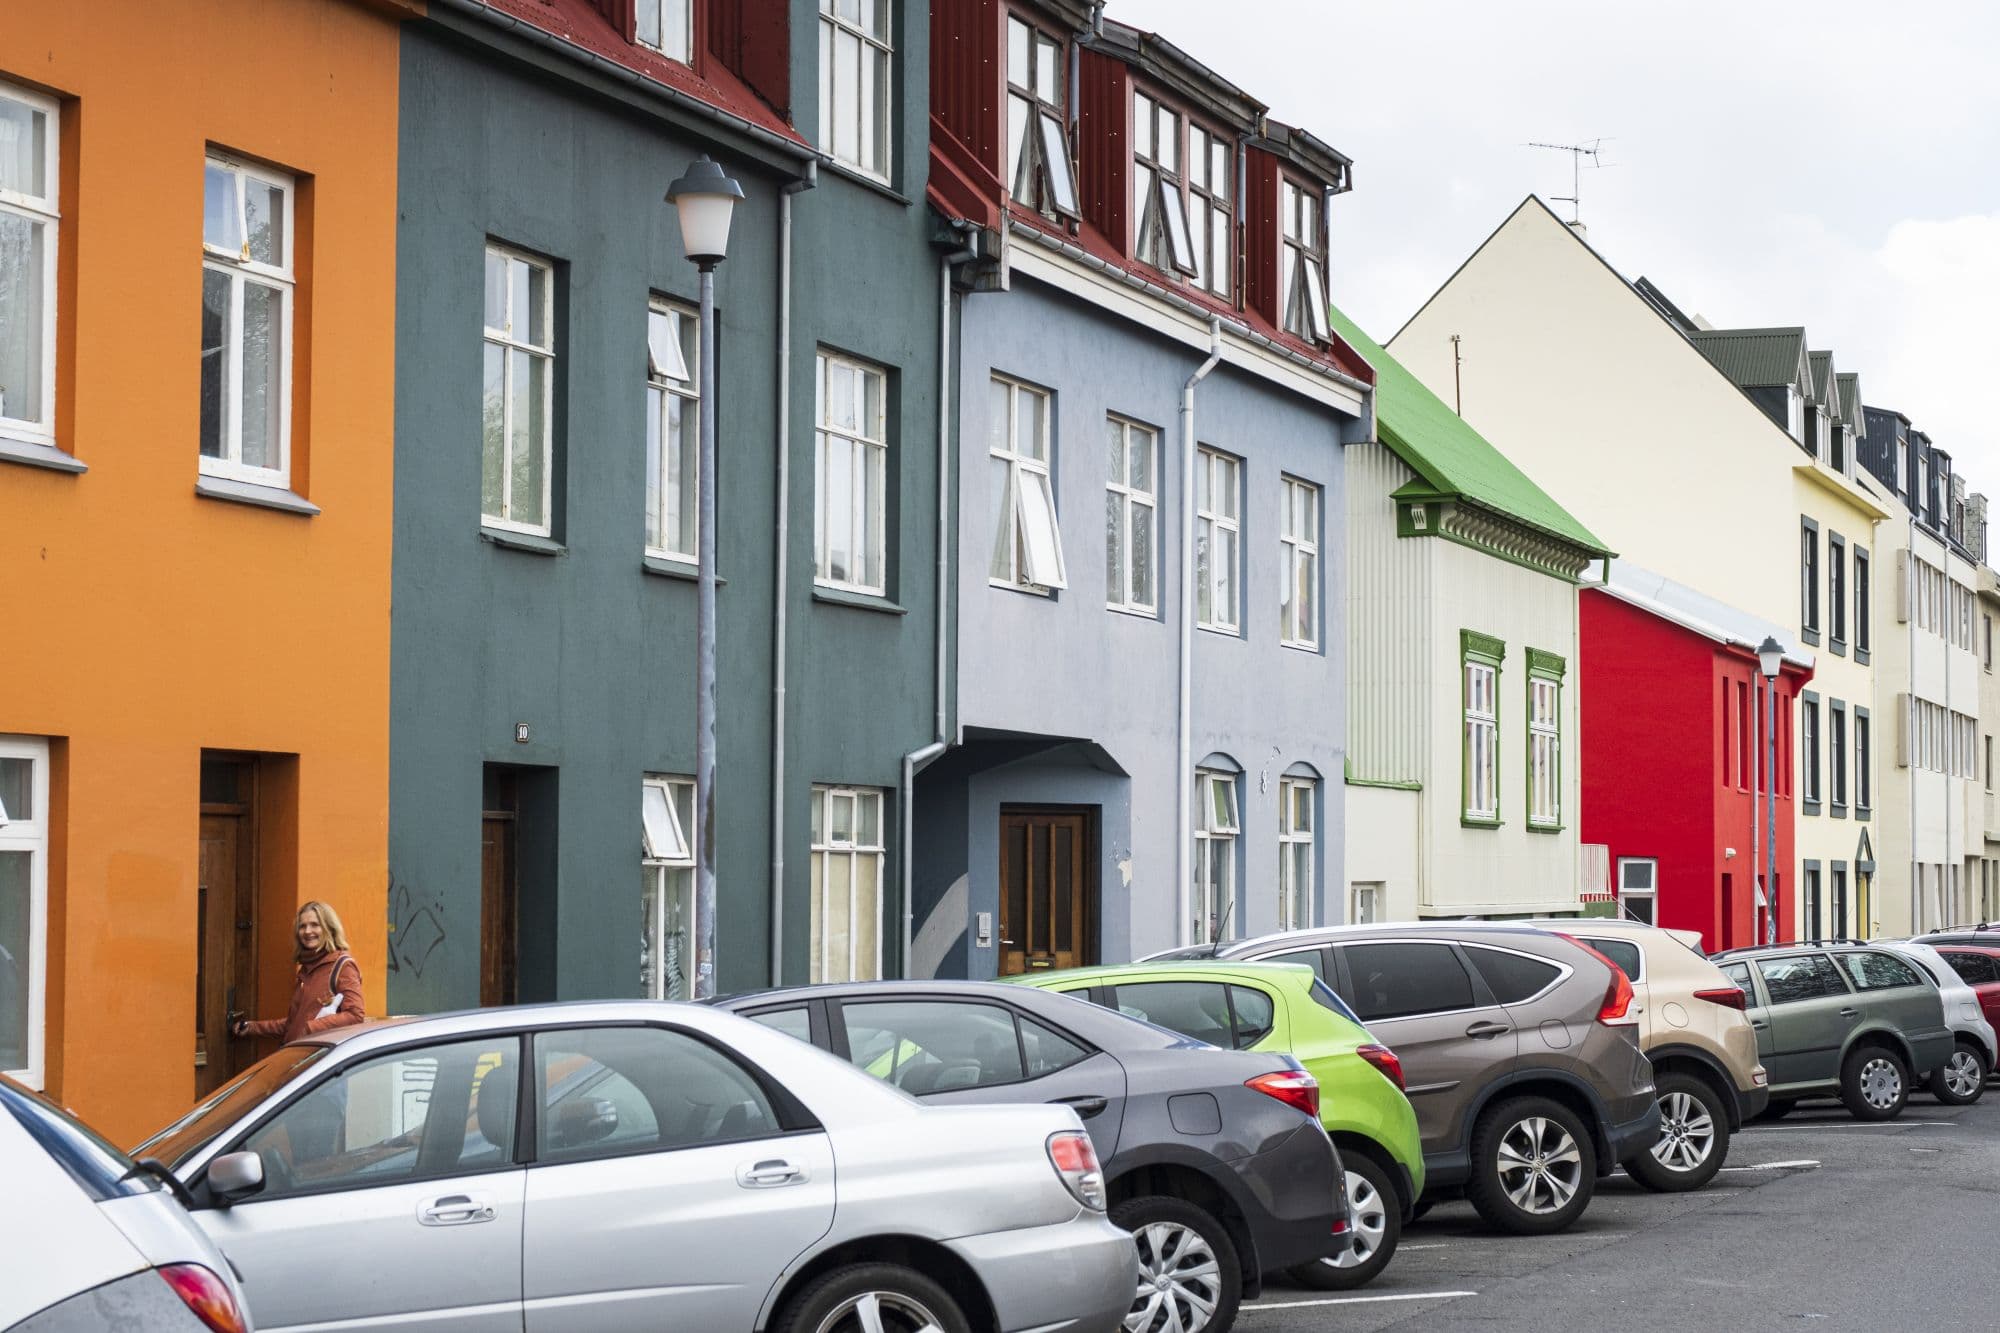 Iceland Sees Surge in Approved Short-Term Apartment Rentals